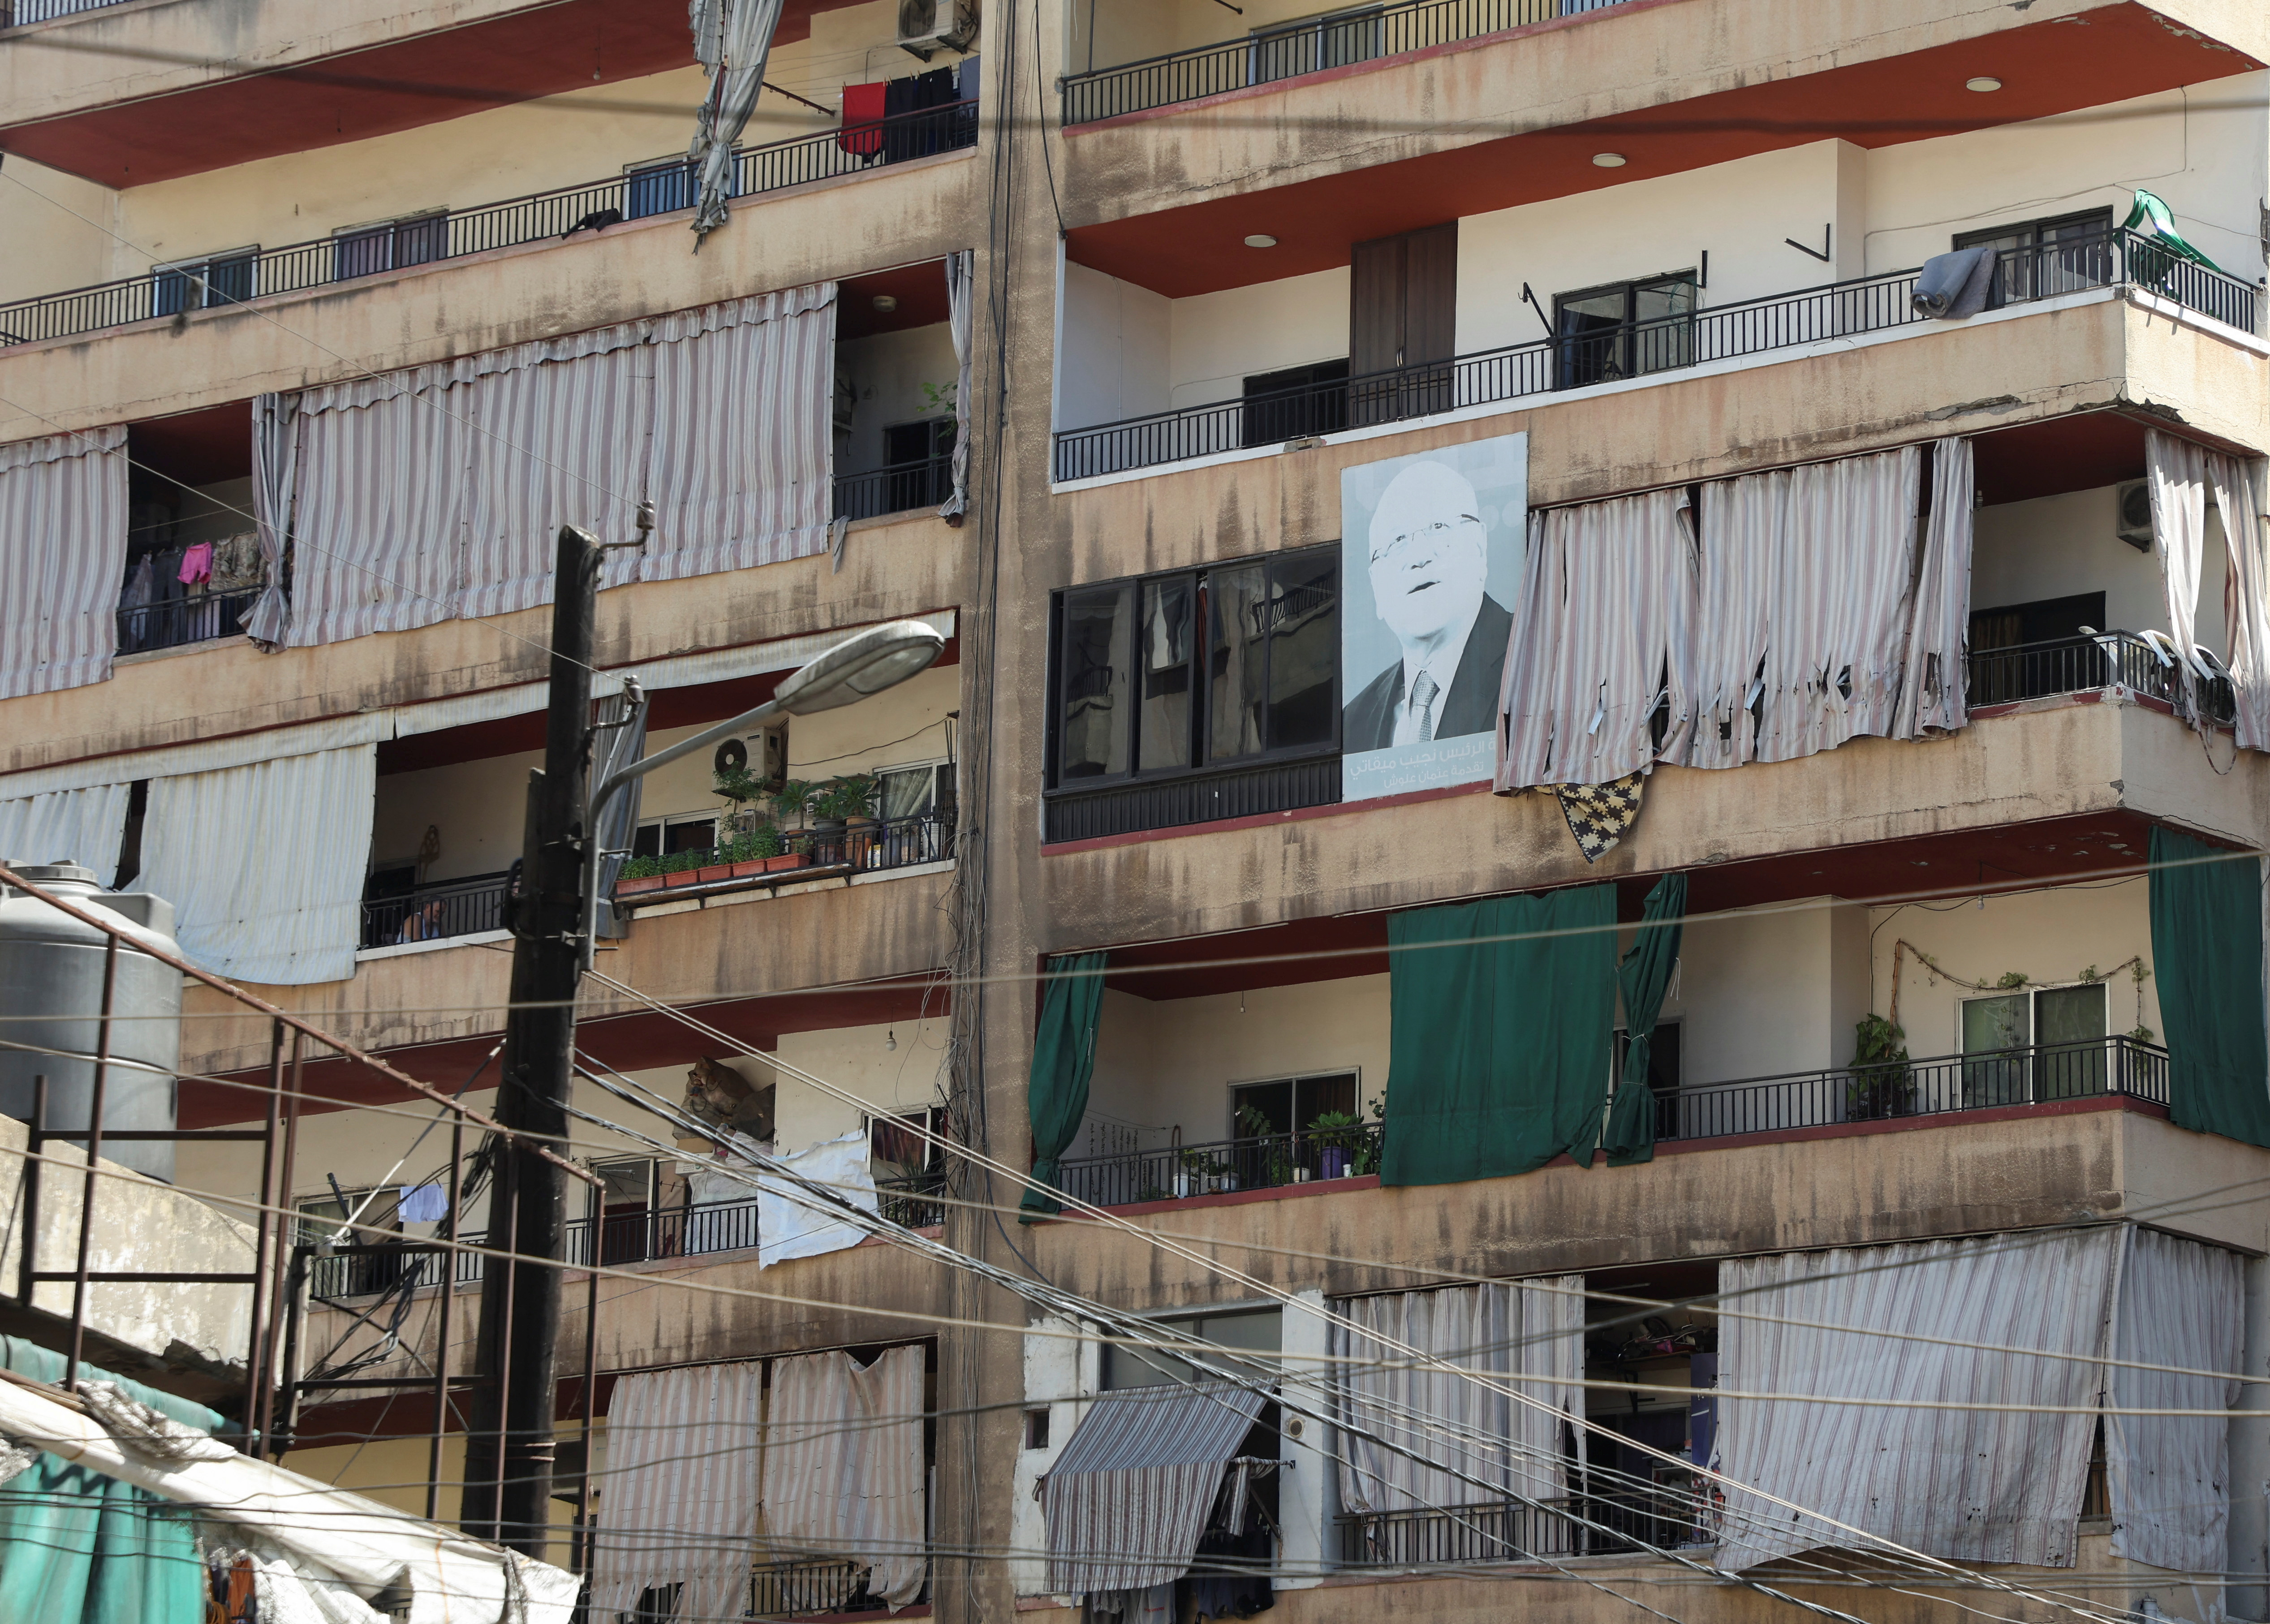 A picture of Lebanon's Prime Minister-designate Najib Mikati is placed on a residential building in the northern city of Tripoli